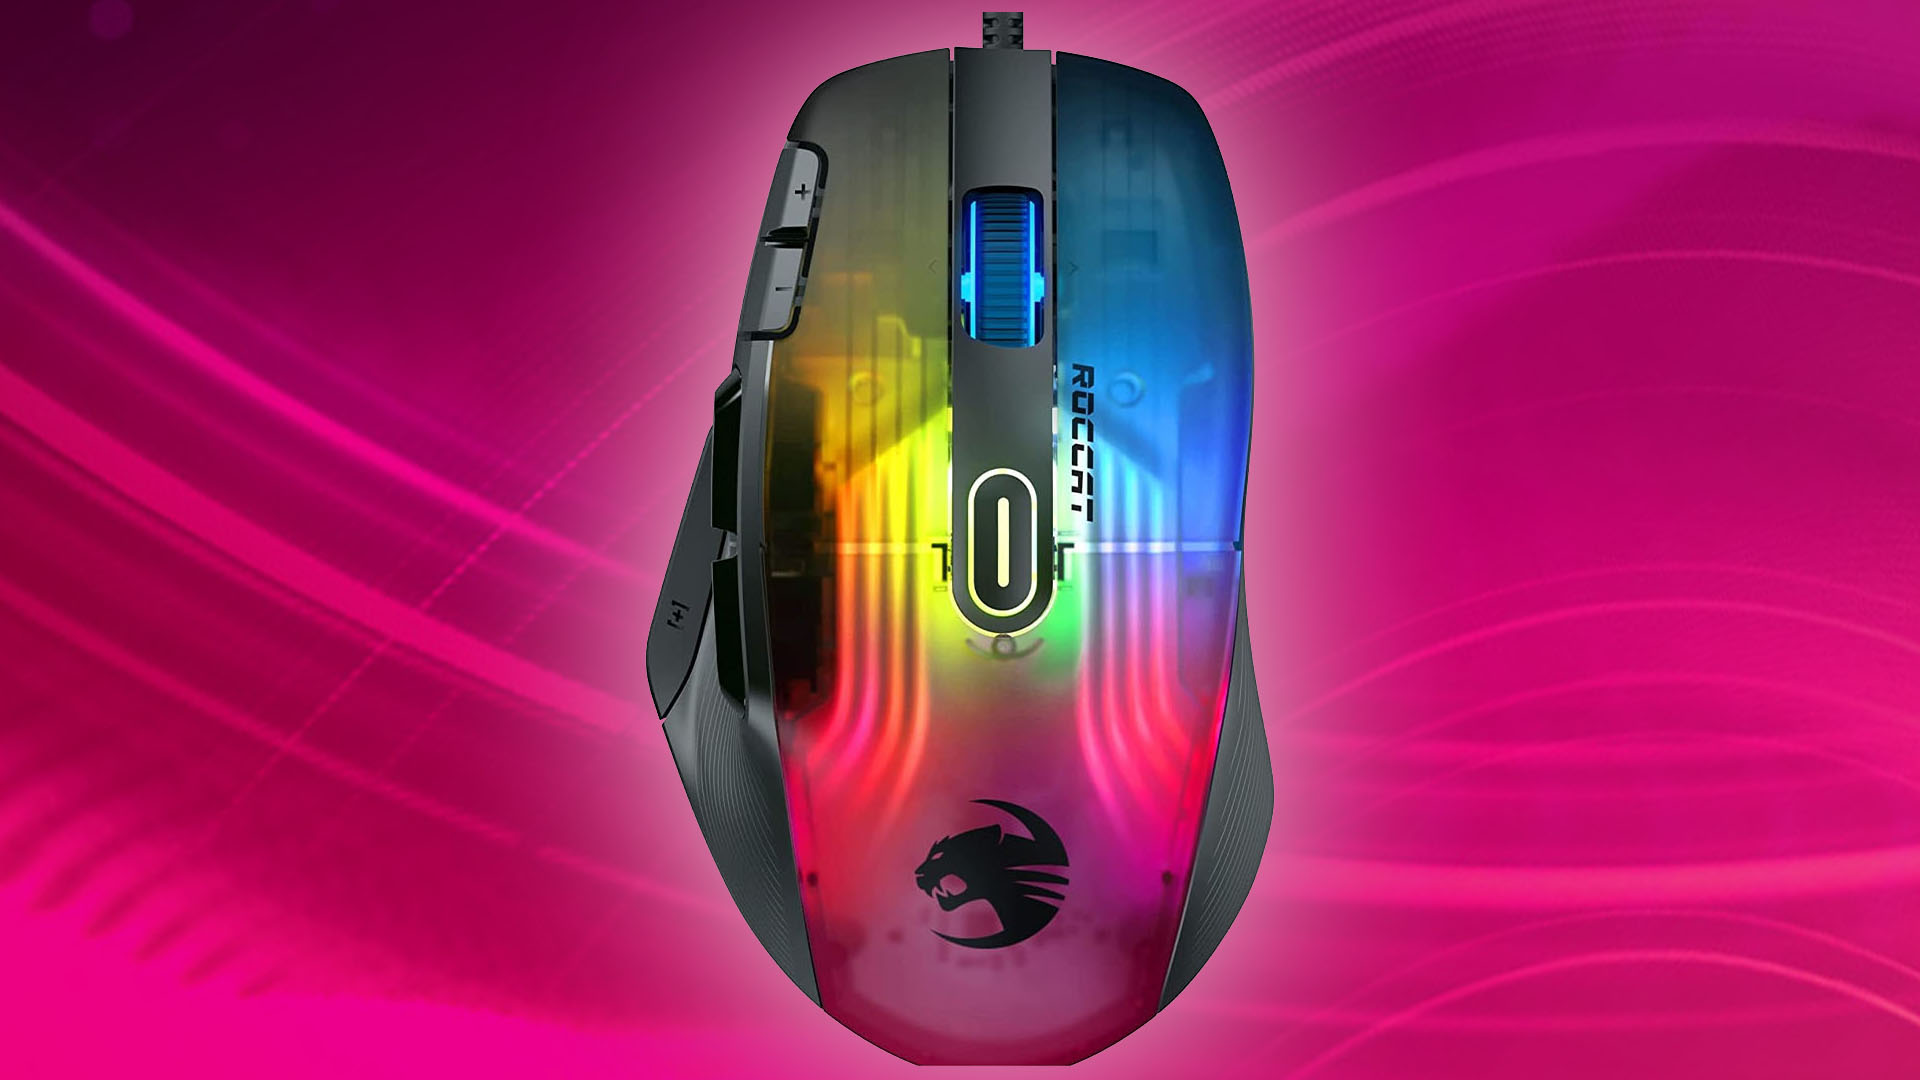 Best gaming mouse - Roccat Kone XP